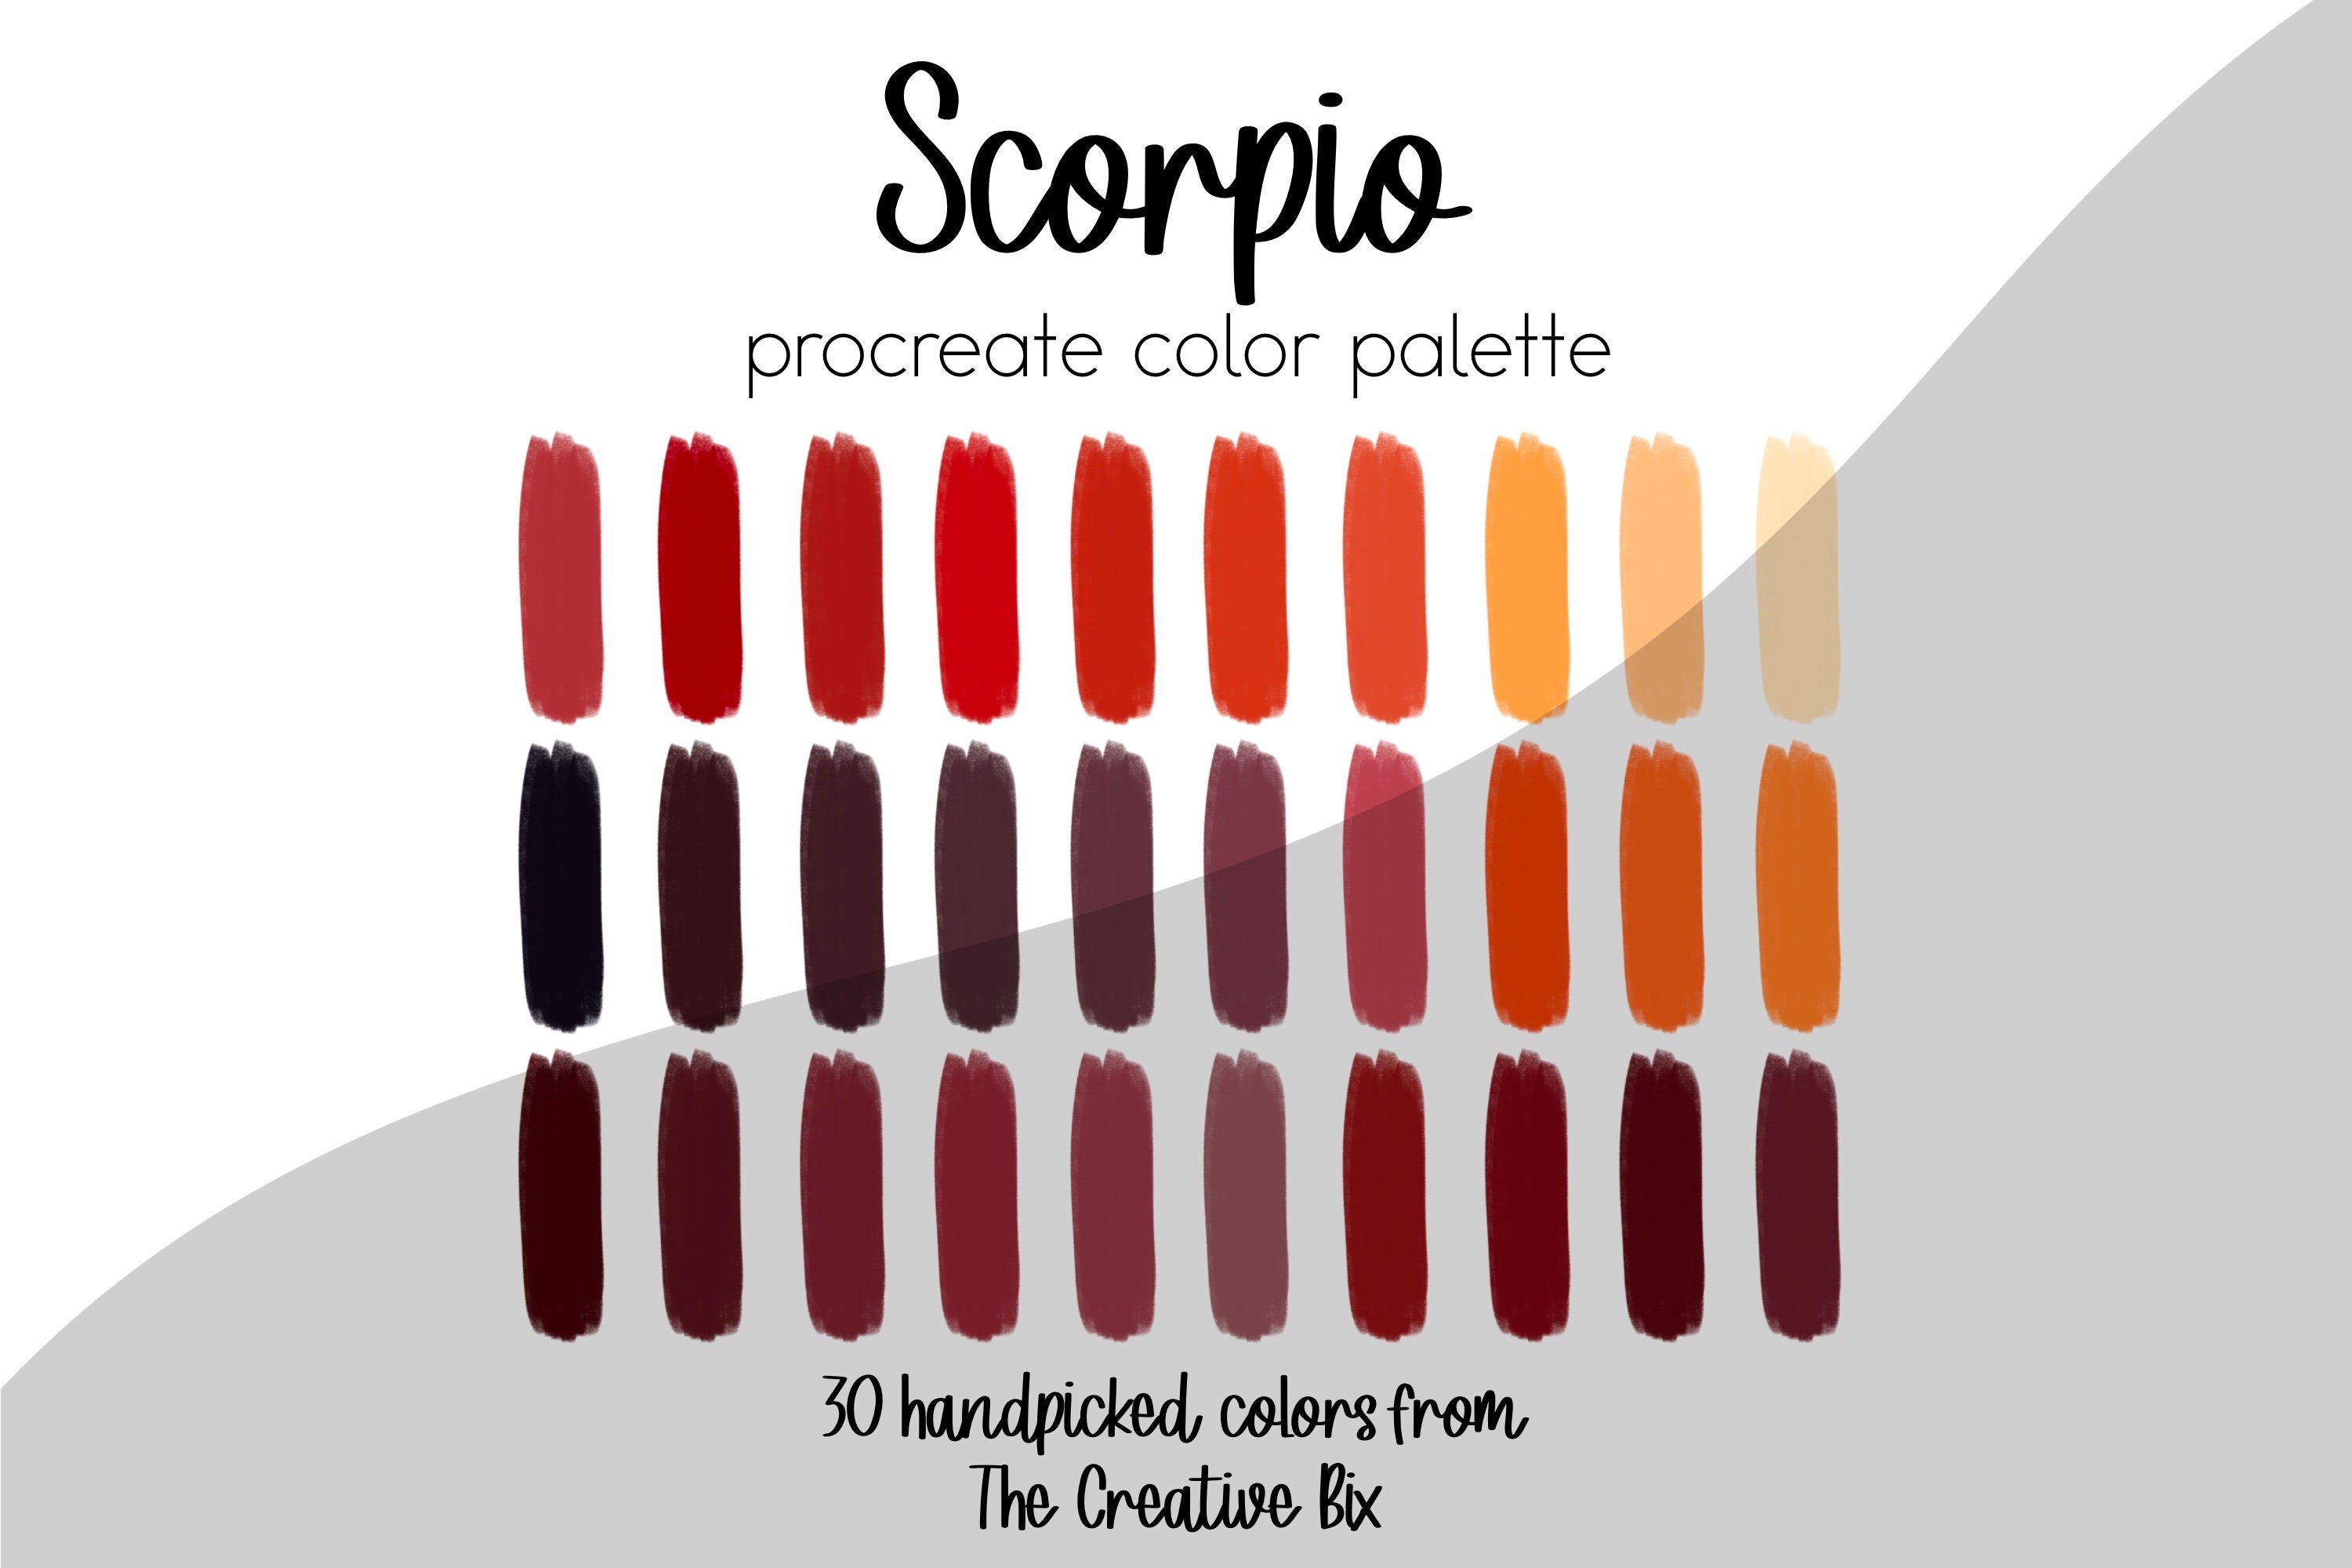 what do scorpios like colors